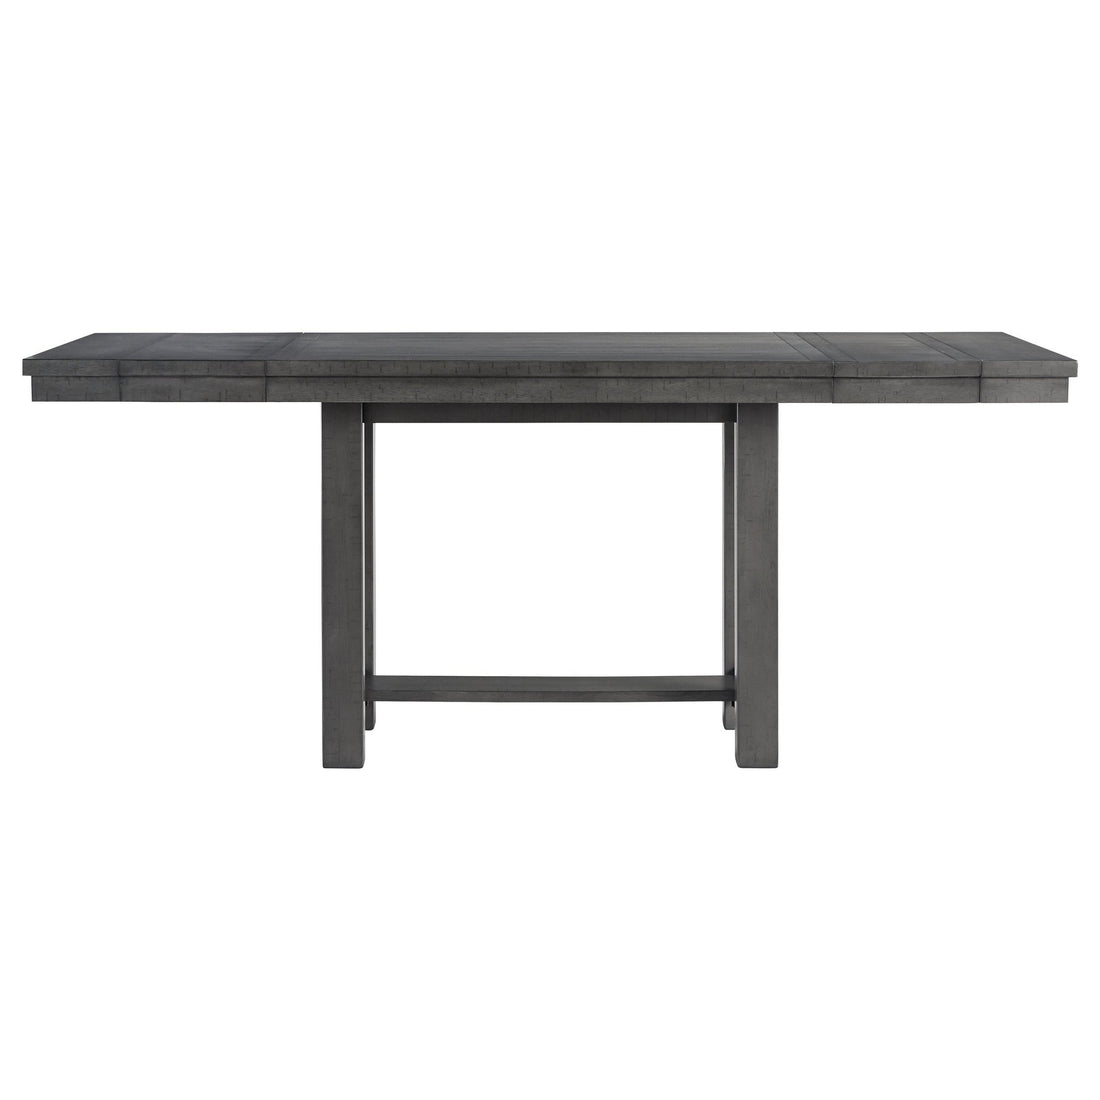 Myshanna Counter Height Dining Extension Table Ash-D629-32